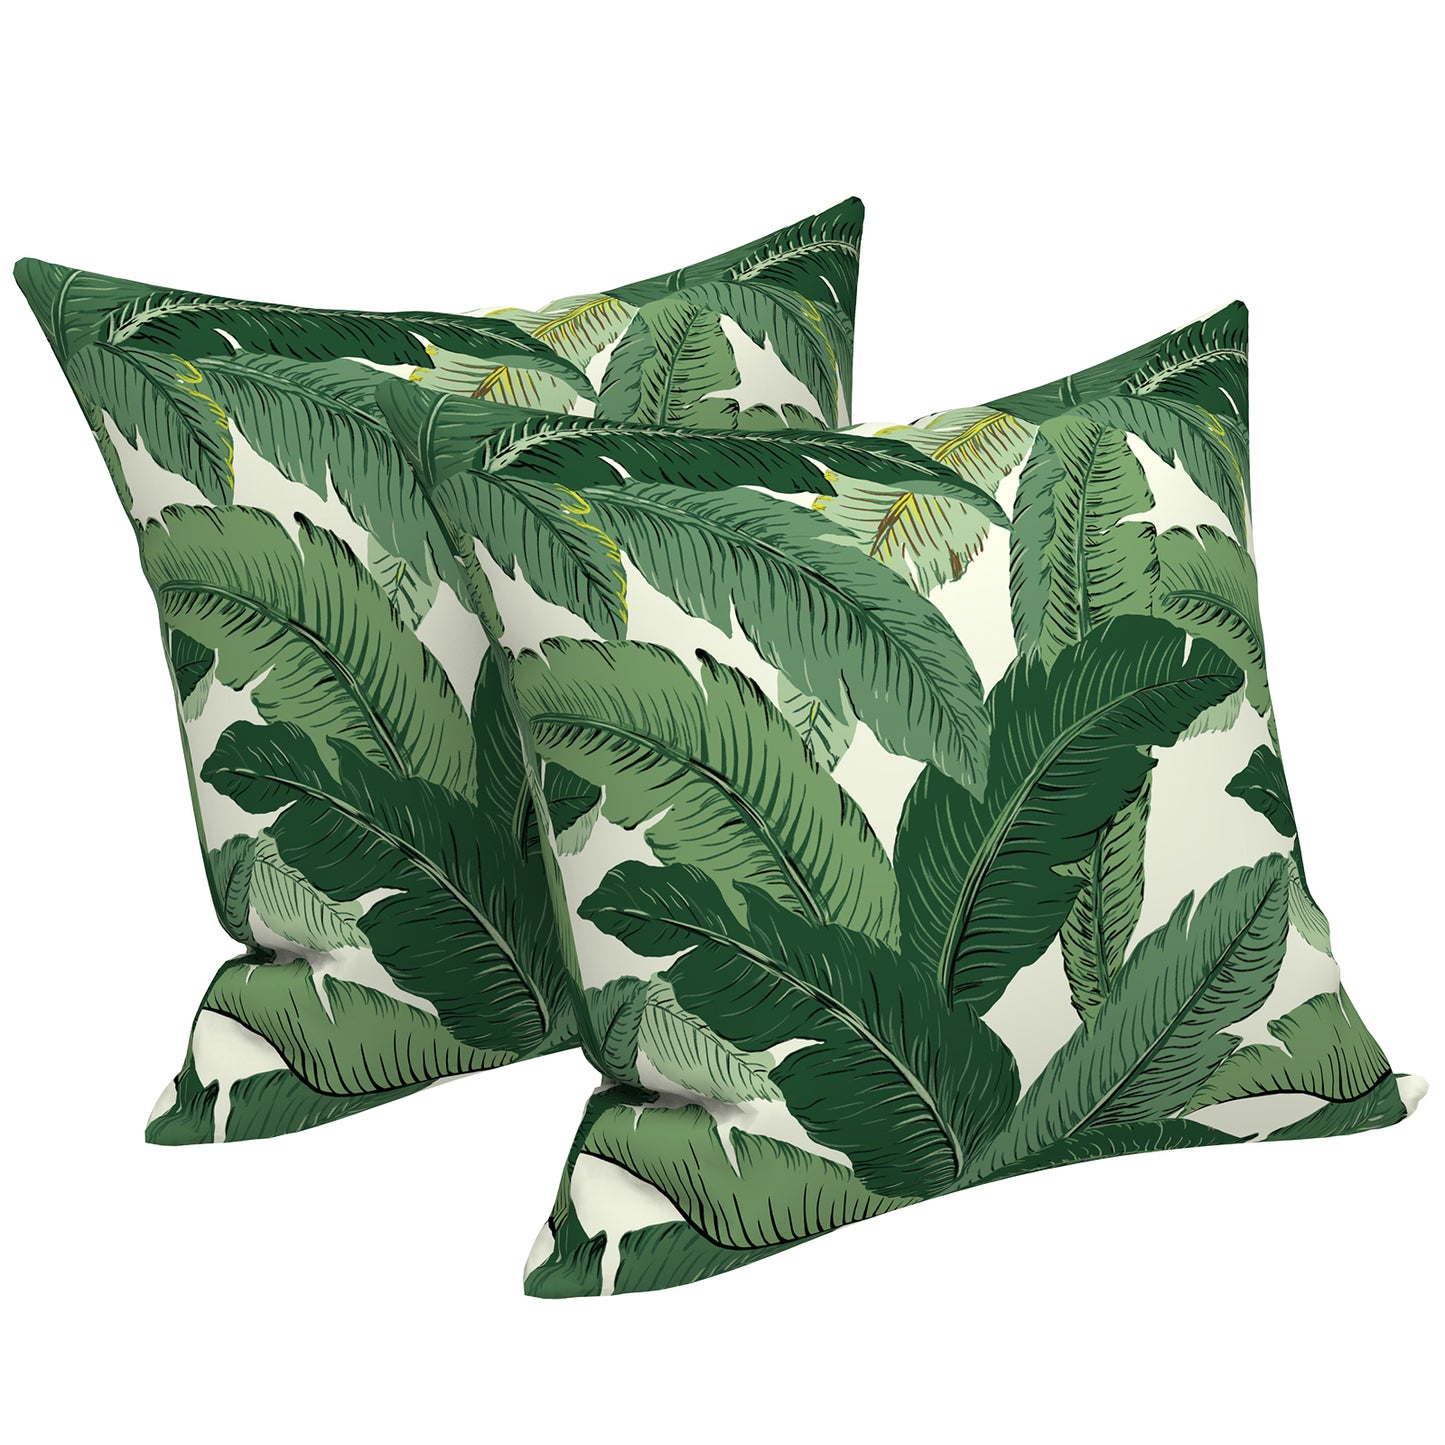 Melody Elephant Patio Throw Pillows with Inners, Fade Resistant Square Pillow Pack of 2, Decorative Garden Cushions for Home, 18x18 Inch, Swaying Palms Green